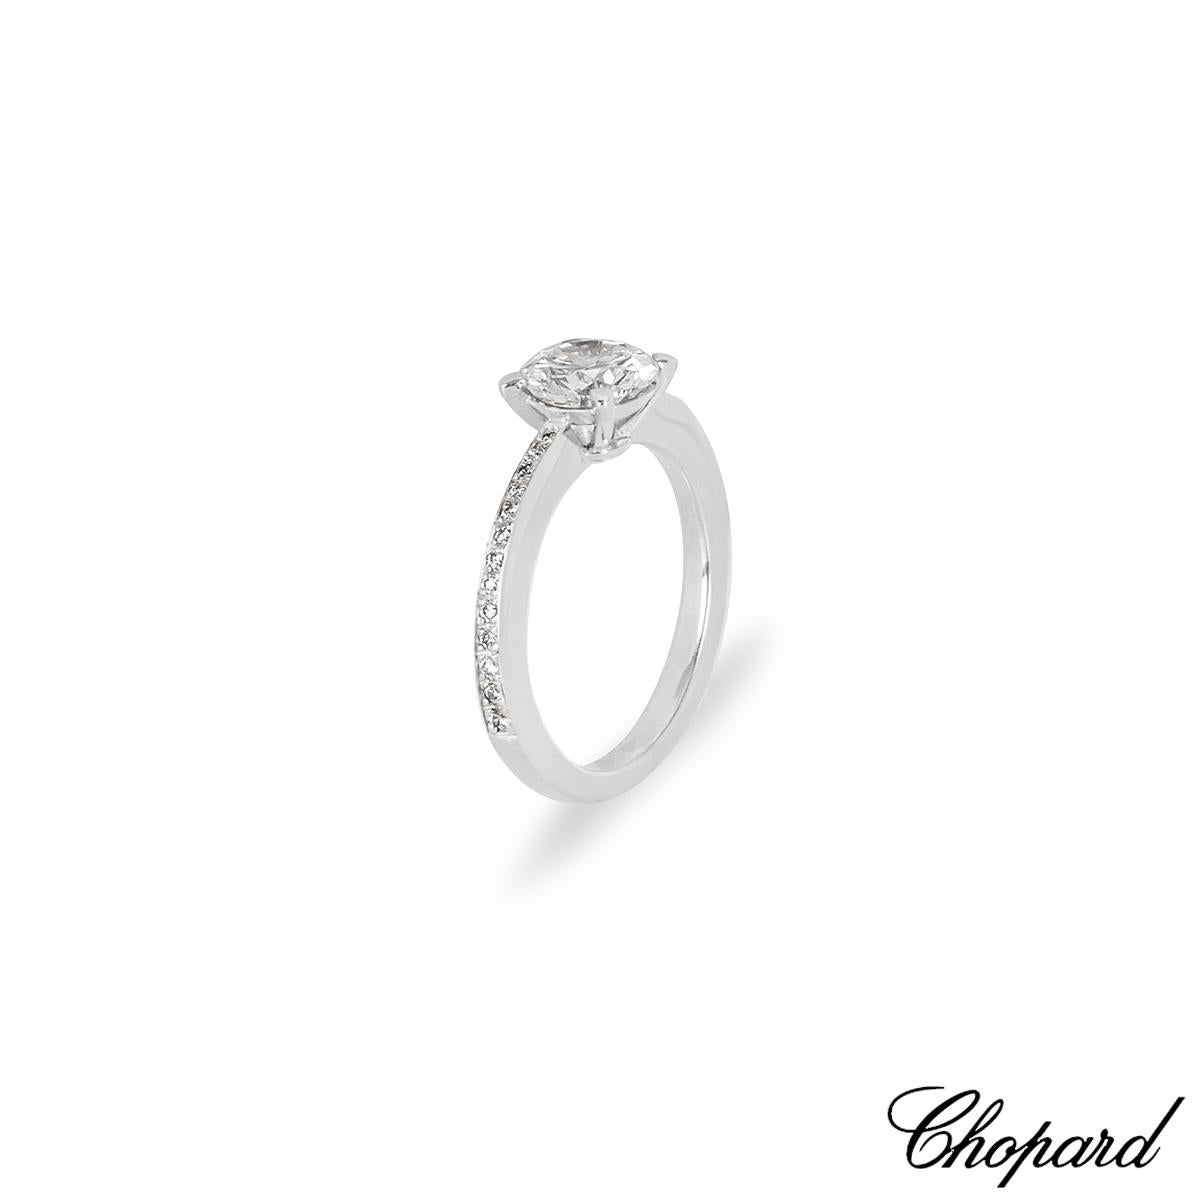 A stunning 18k white gold diamond ring by Chopard. The ring is set to the centre with a round brilliant cut diamond in a classic four claw mount, weighing 1.01ct, D colour and VS2 clarity. The centre diamond is further complemented by 26 round